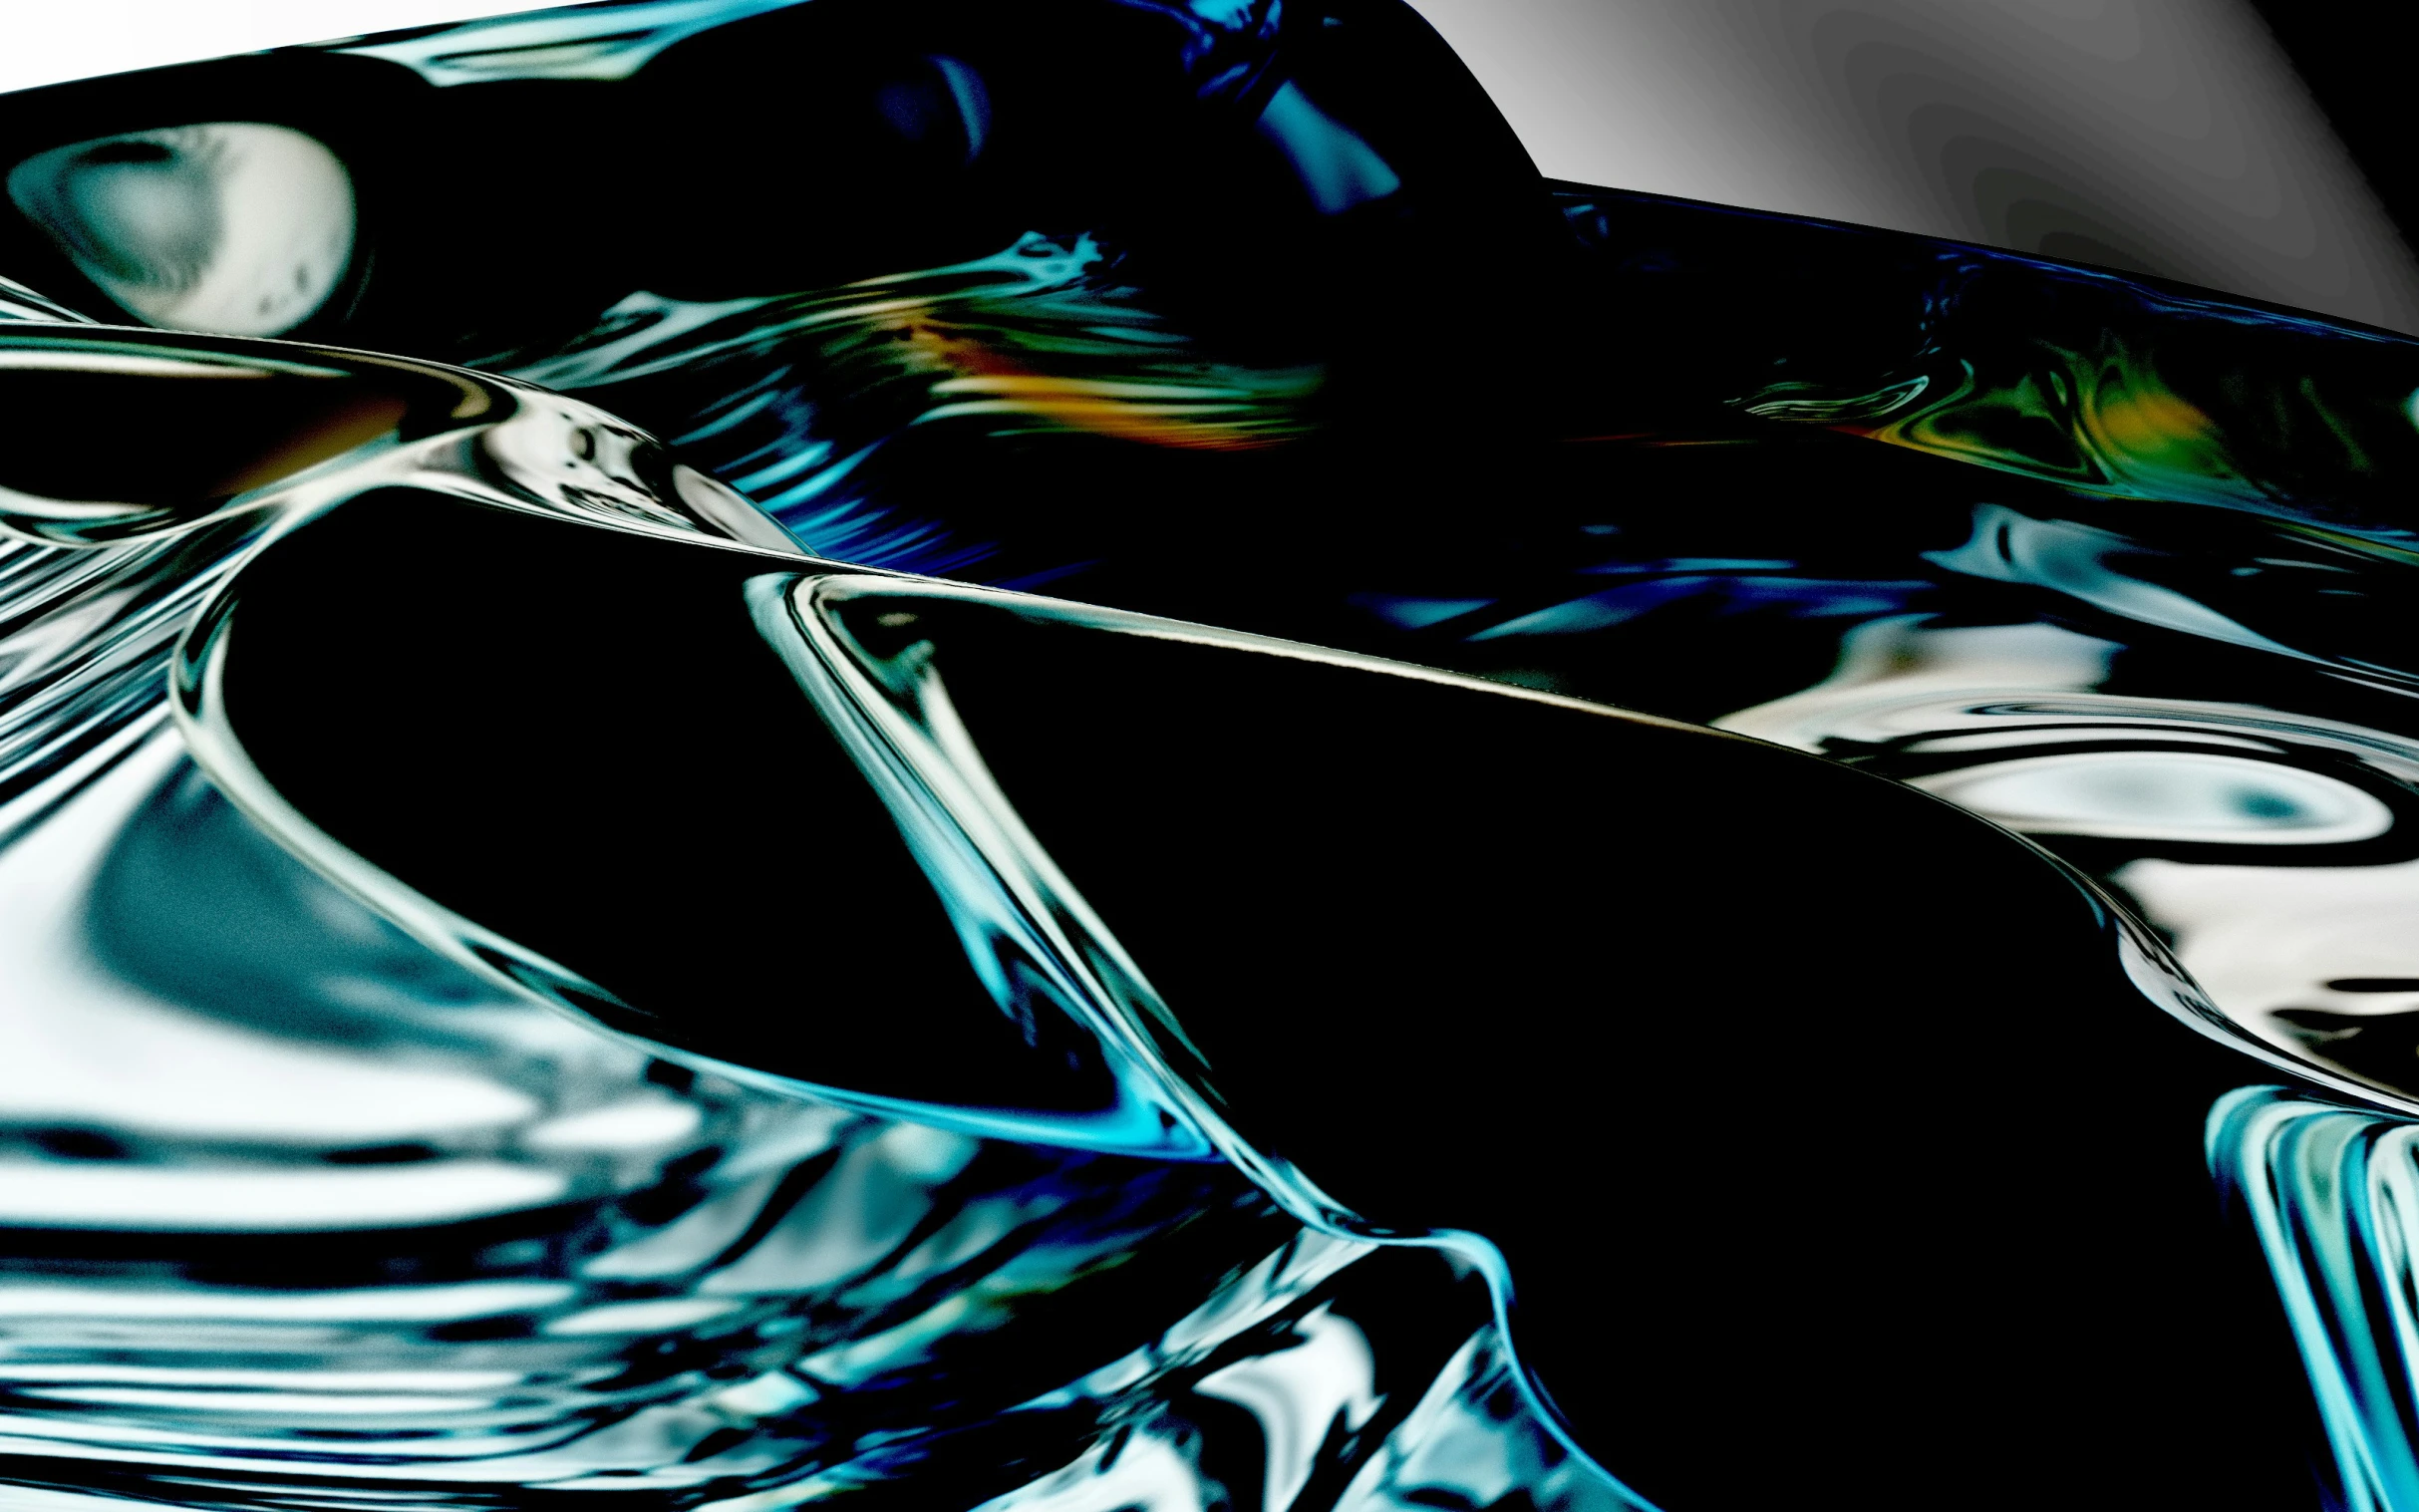 water is swirling on the surface of a glass